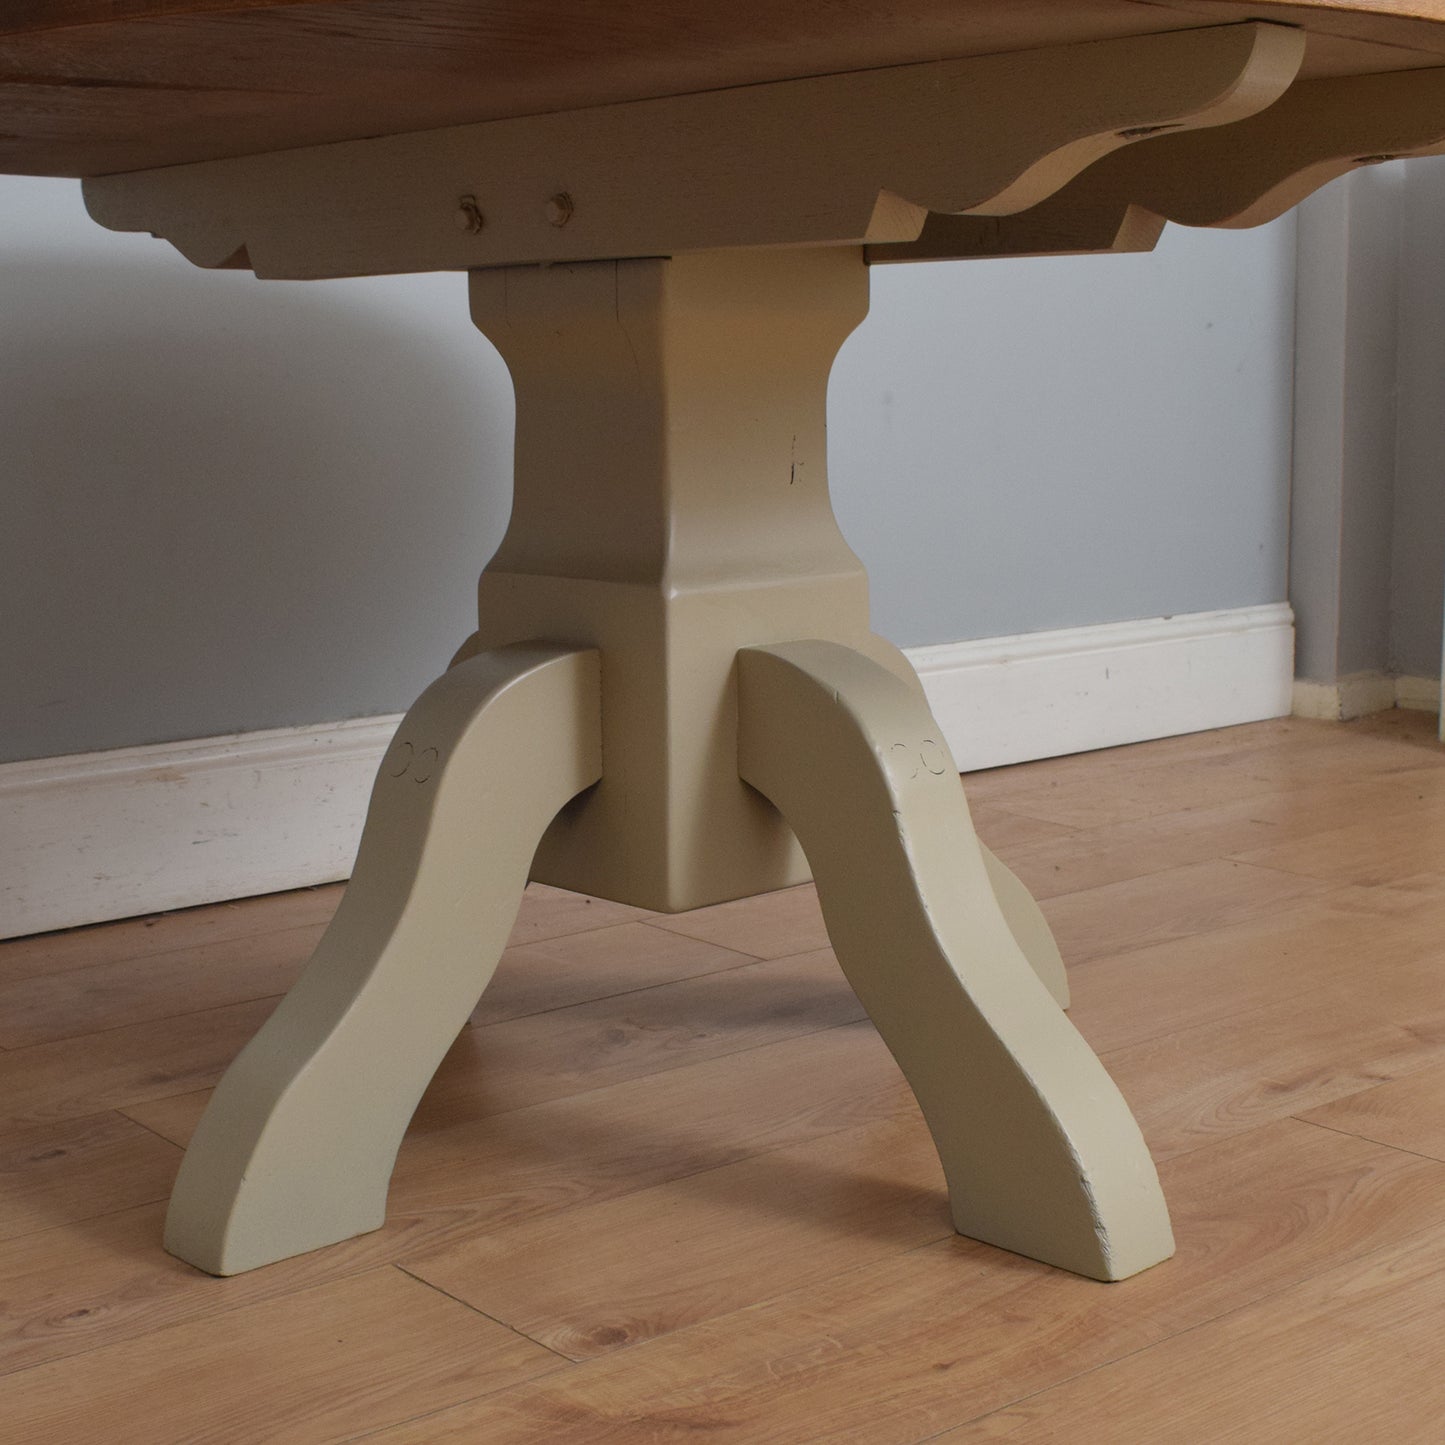 Painted Round Oak Dining Table and Four Chairs